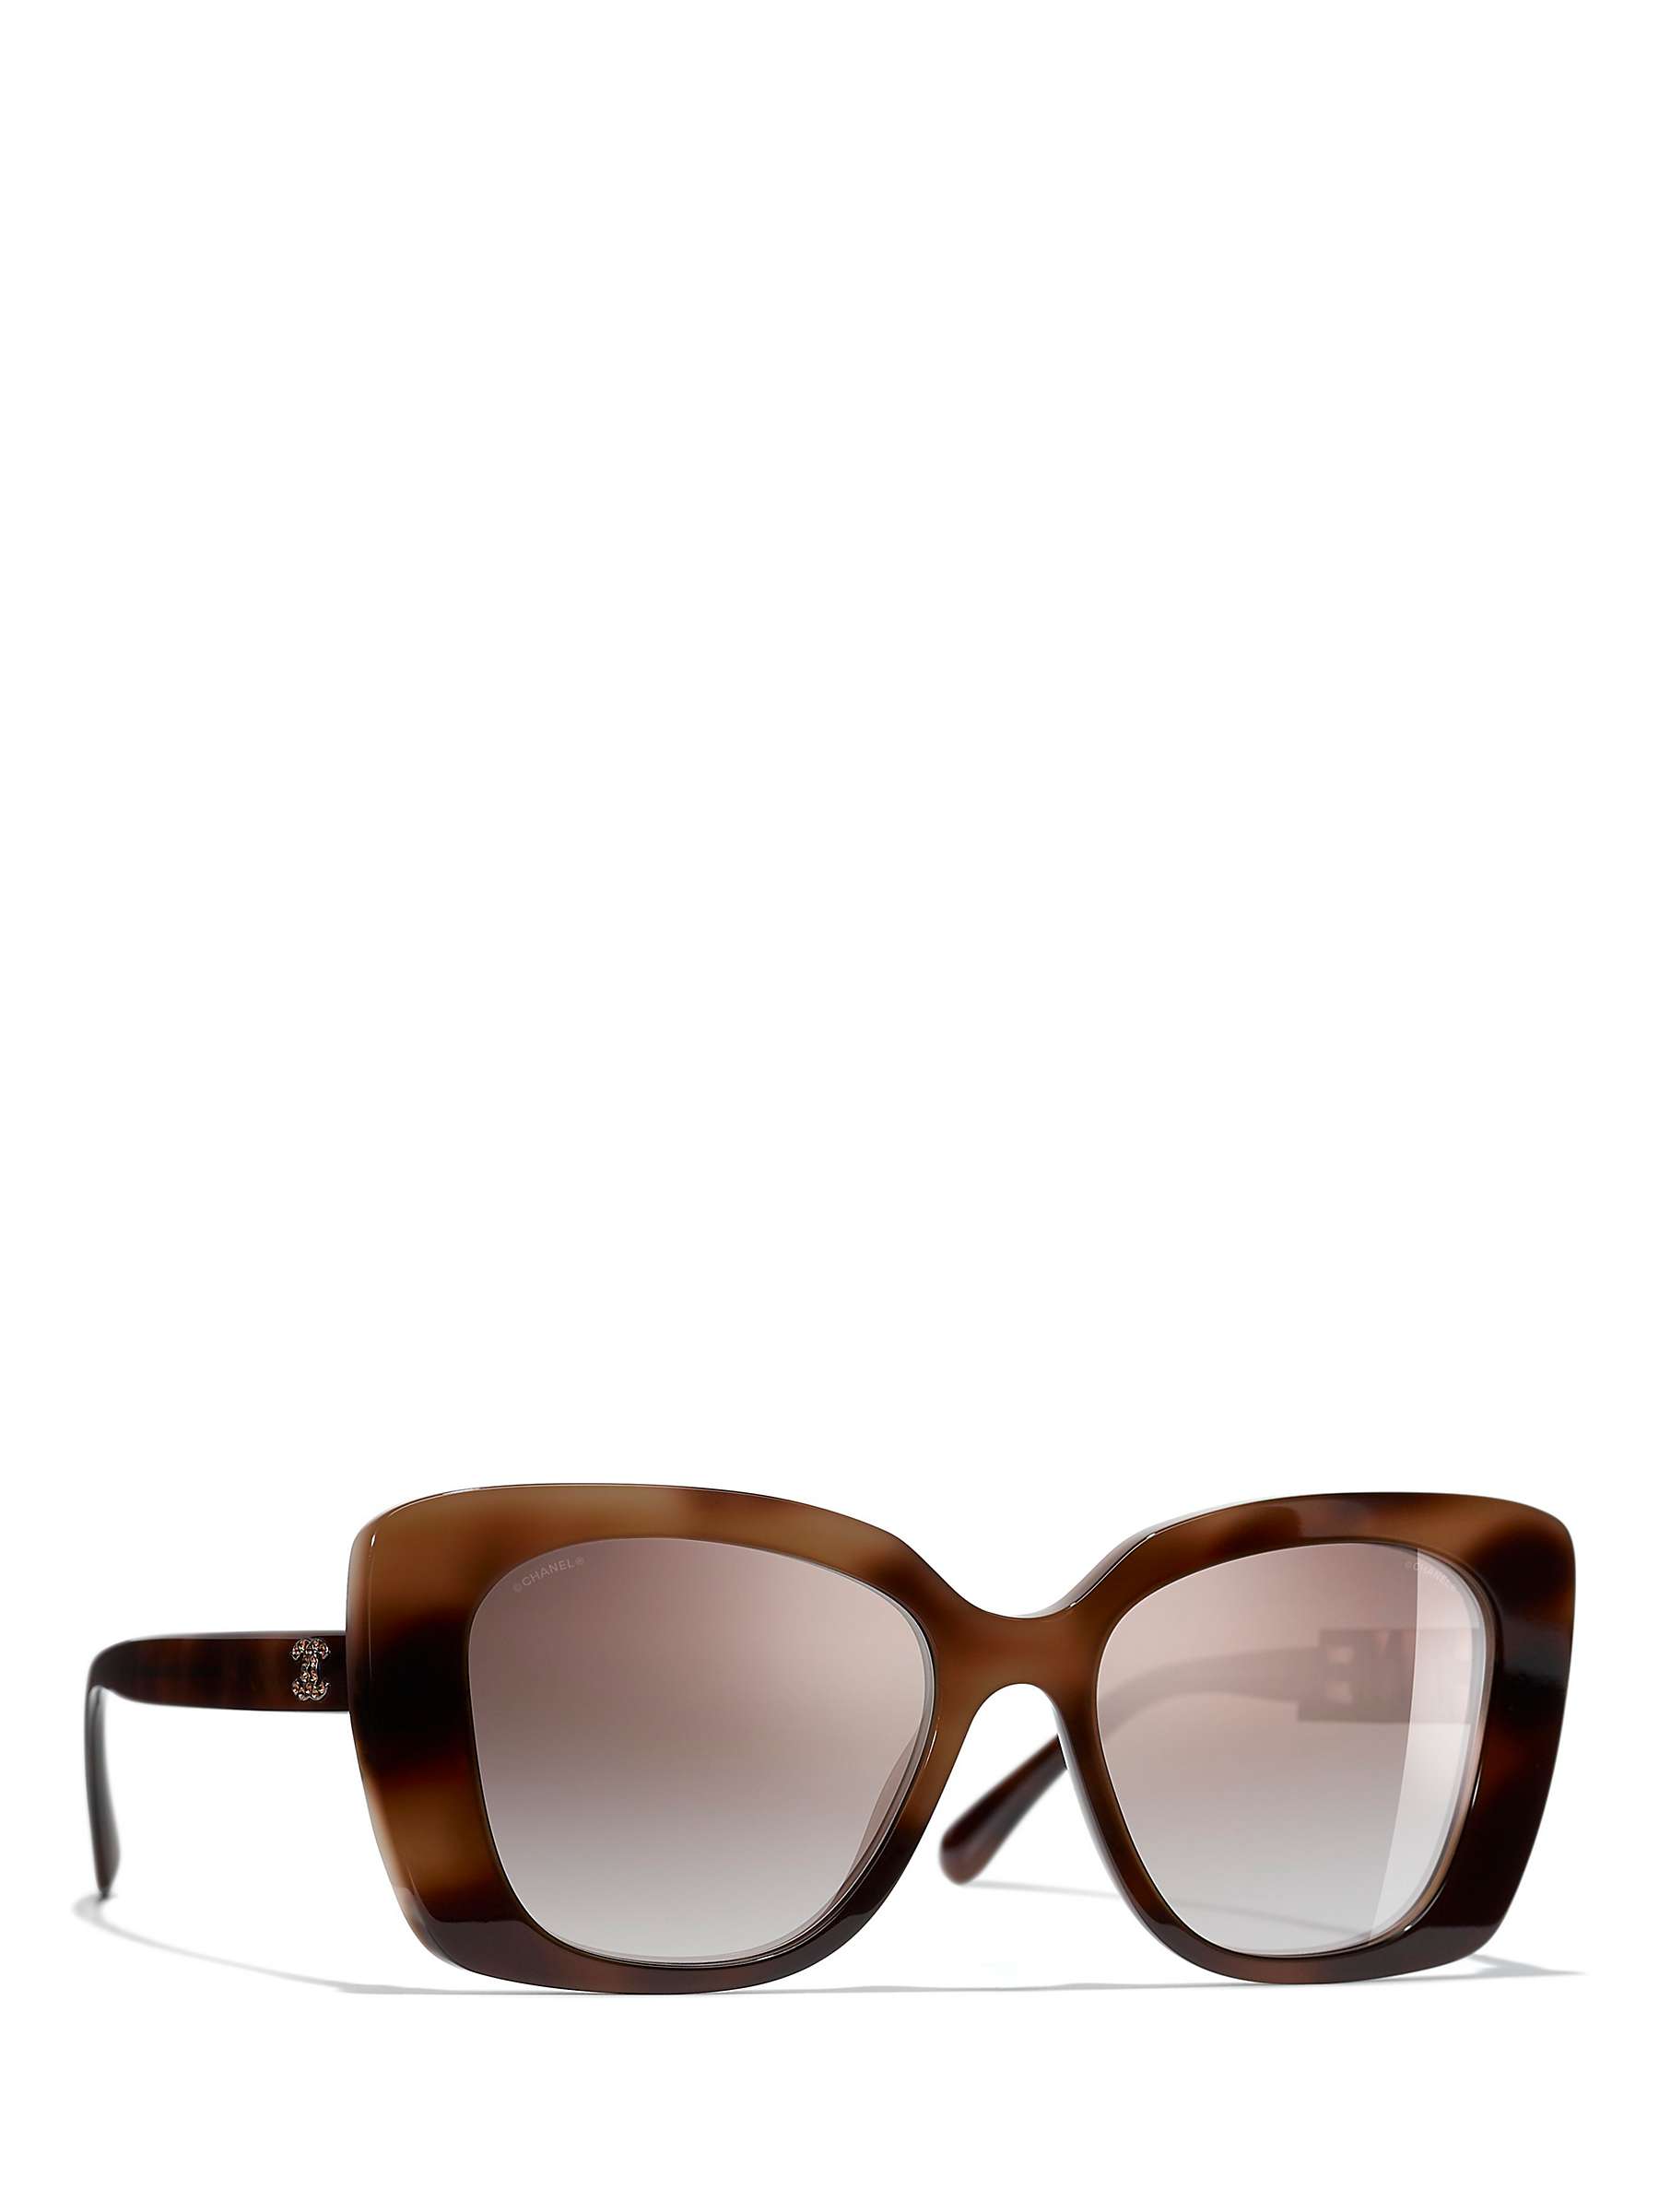 Buy CHANEL Pillow Sunglasses CH5422B Tortoise/Mirror Brown Online at johnlewis.com